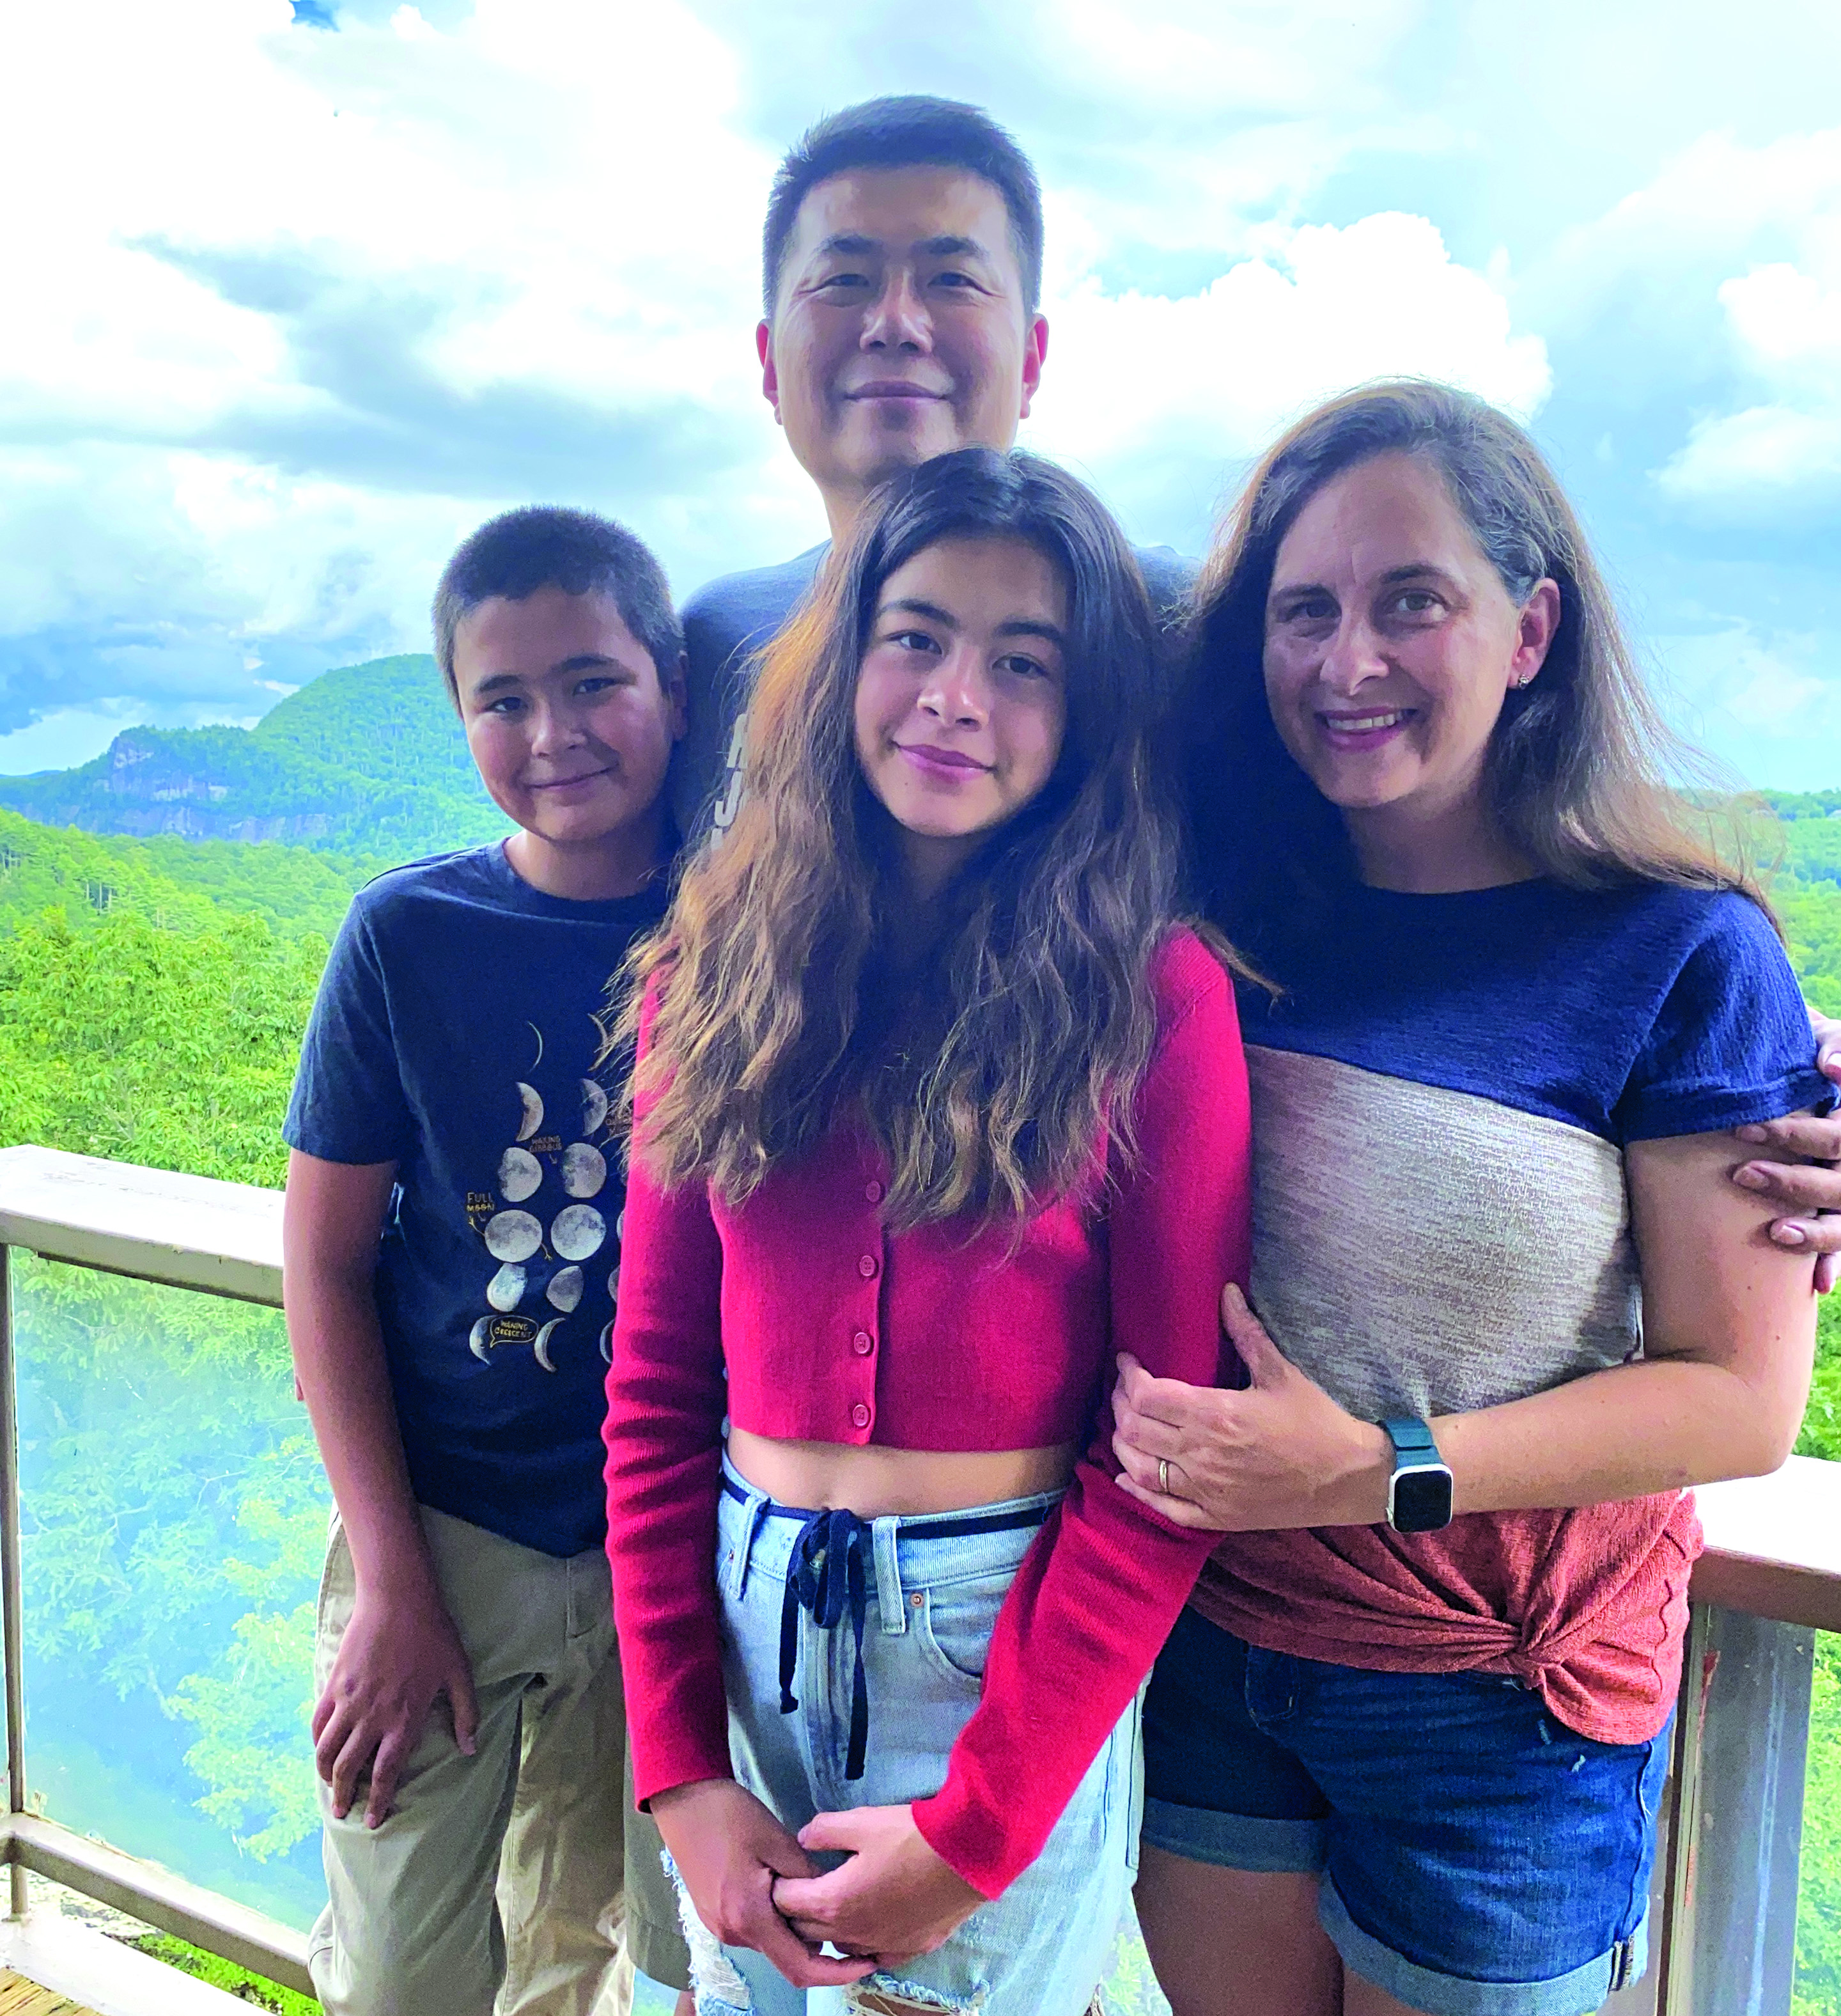 Michael Ye was reunited with his family, from left, Micah, Anna Belle and wife, Melanie, on July 20.